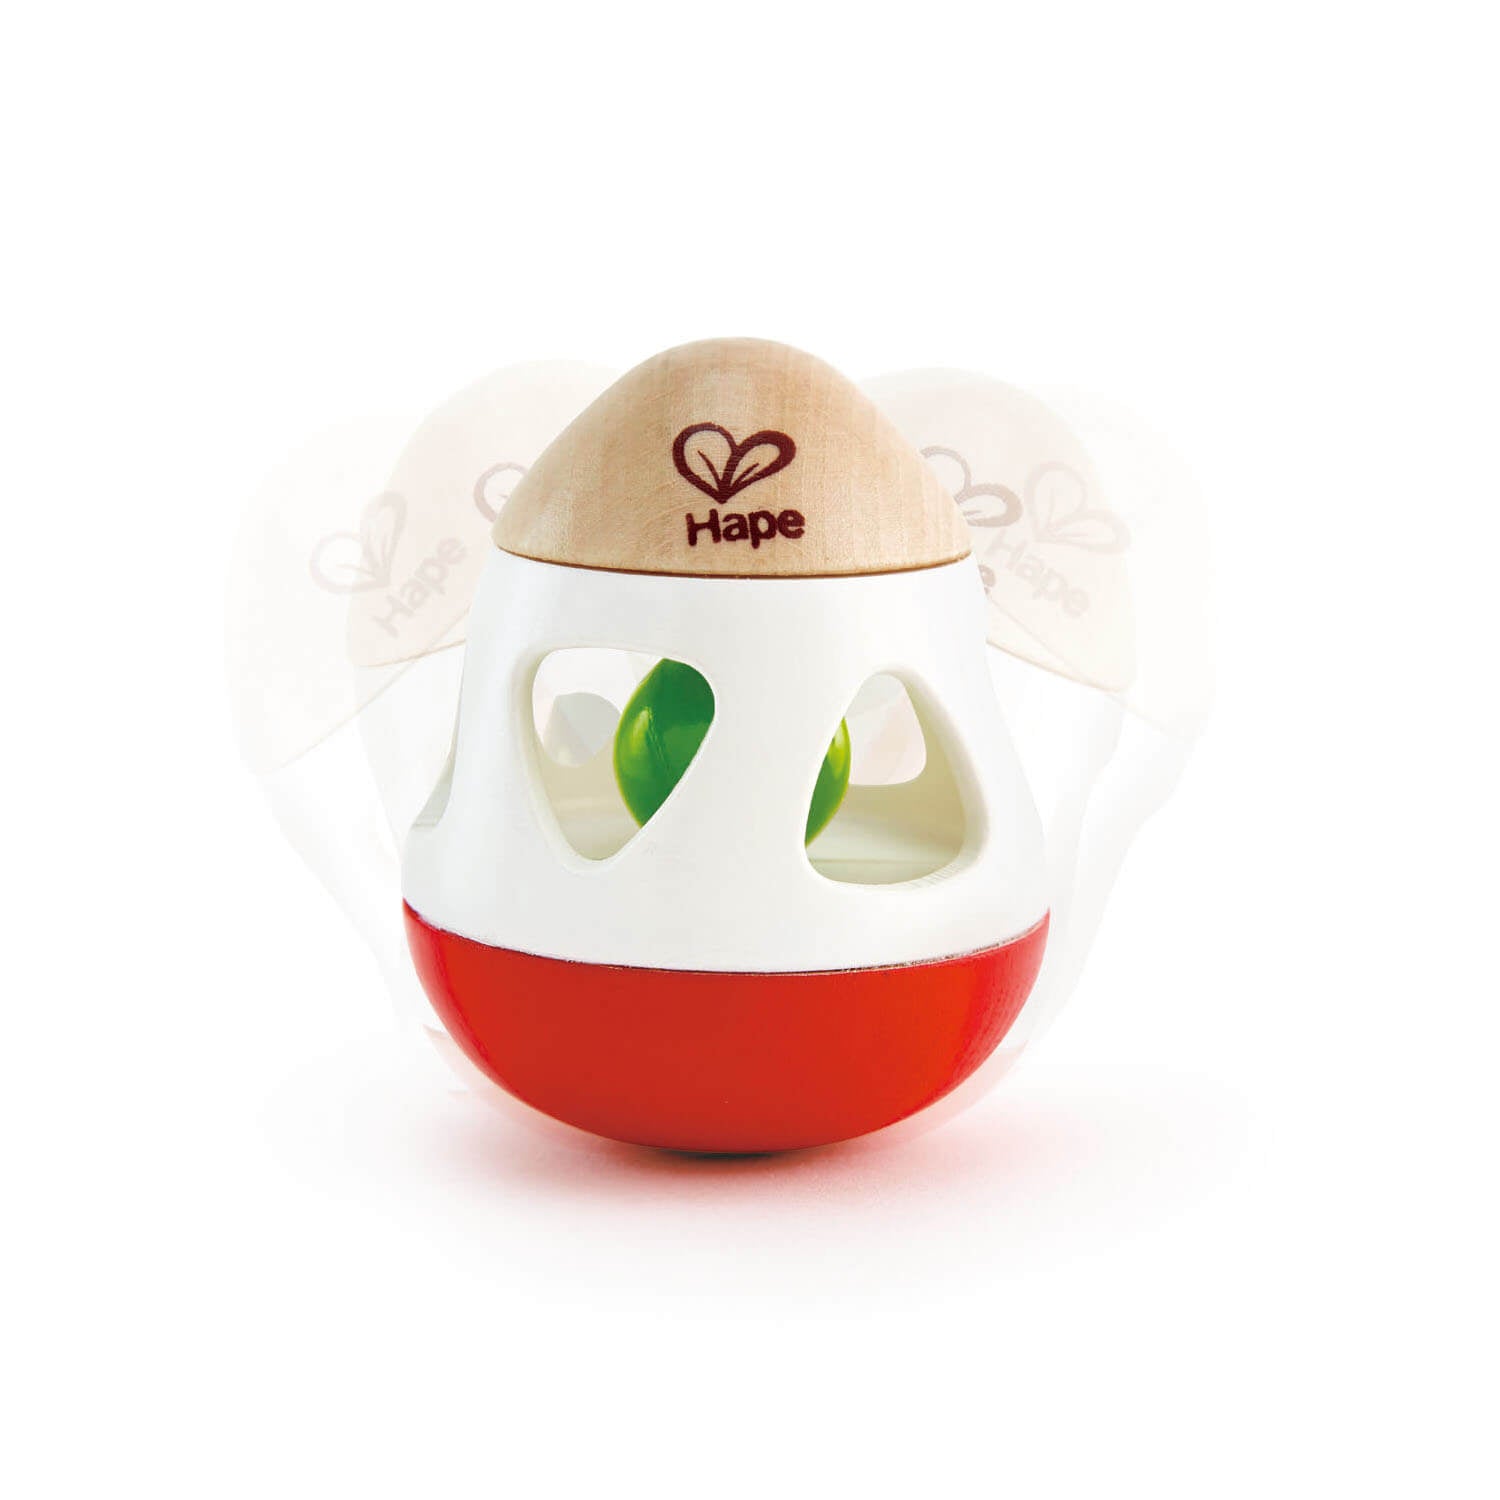 Hape Bell Rattle Baby Toy